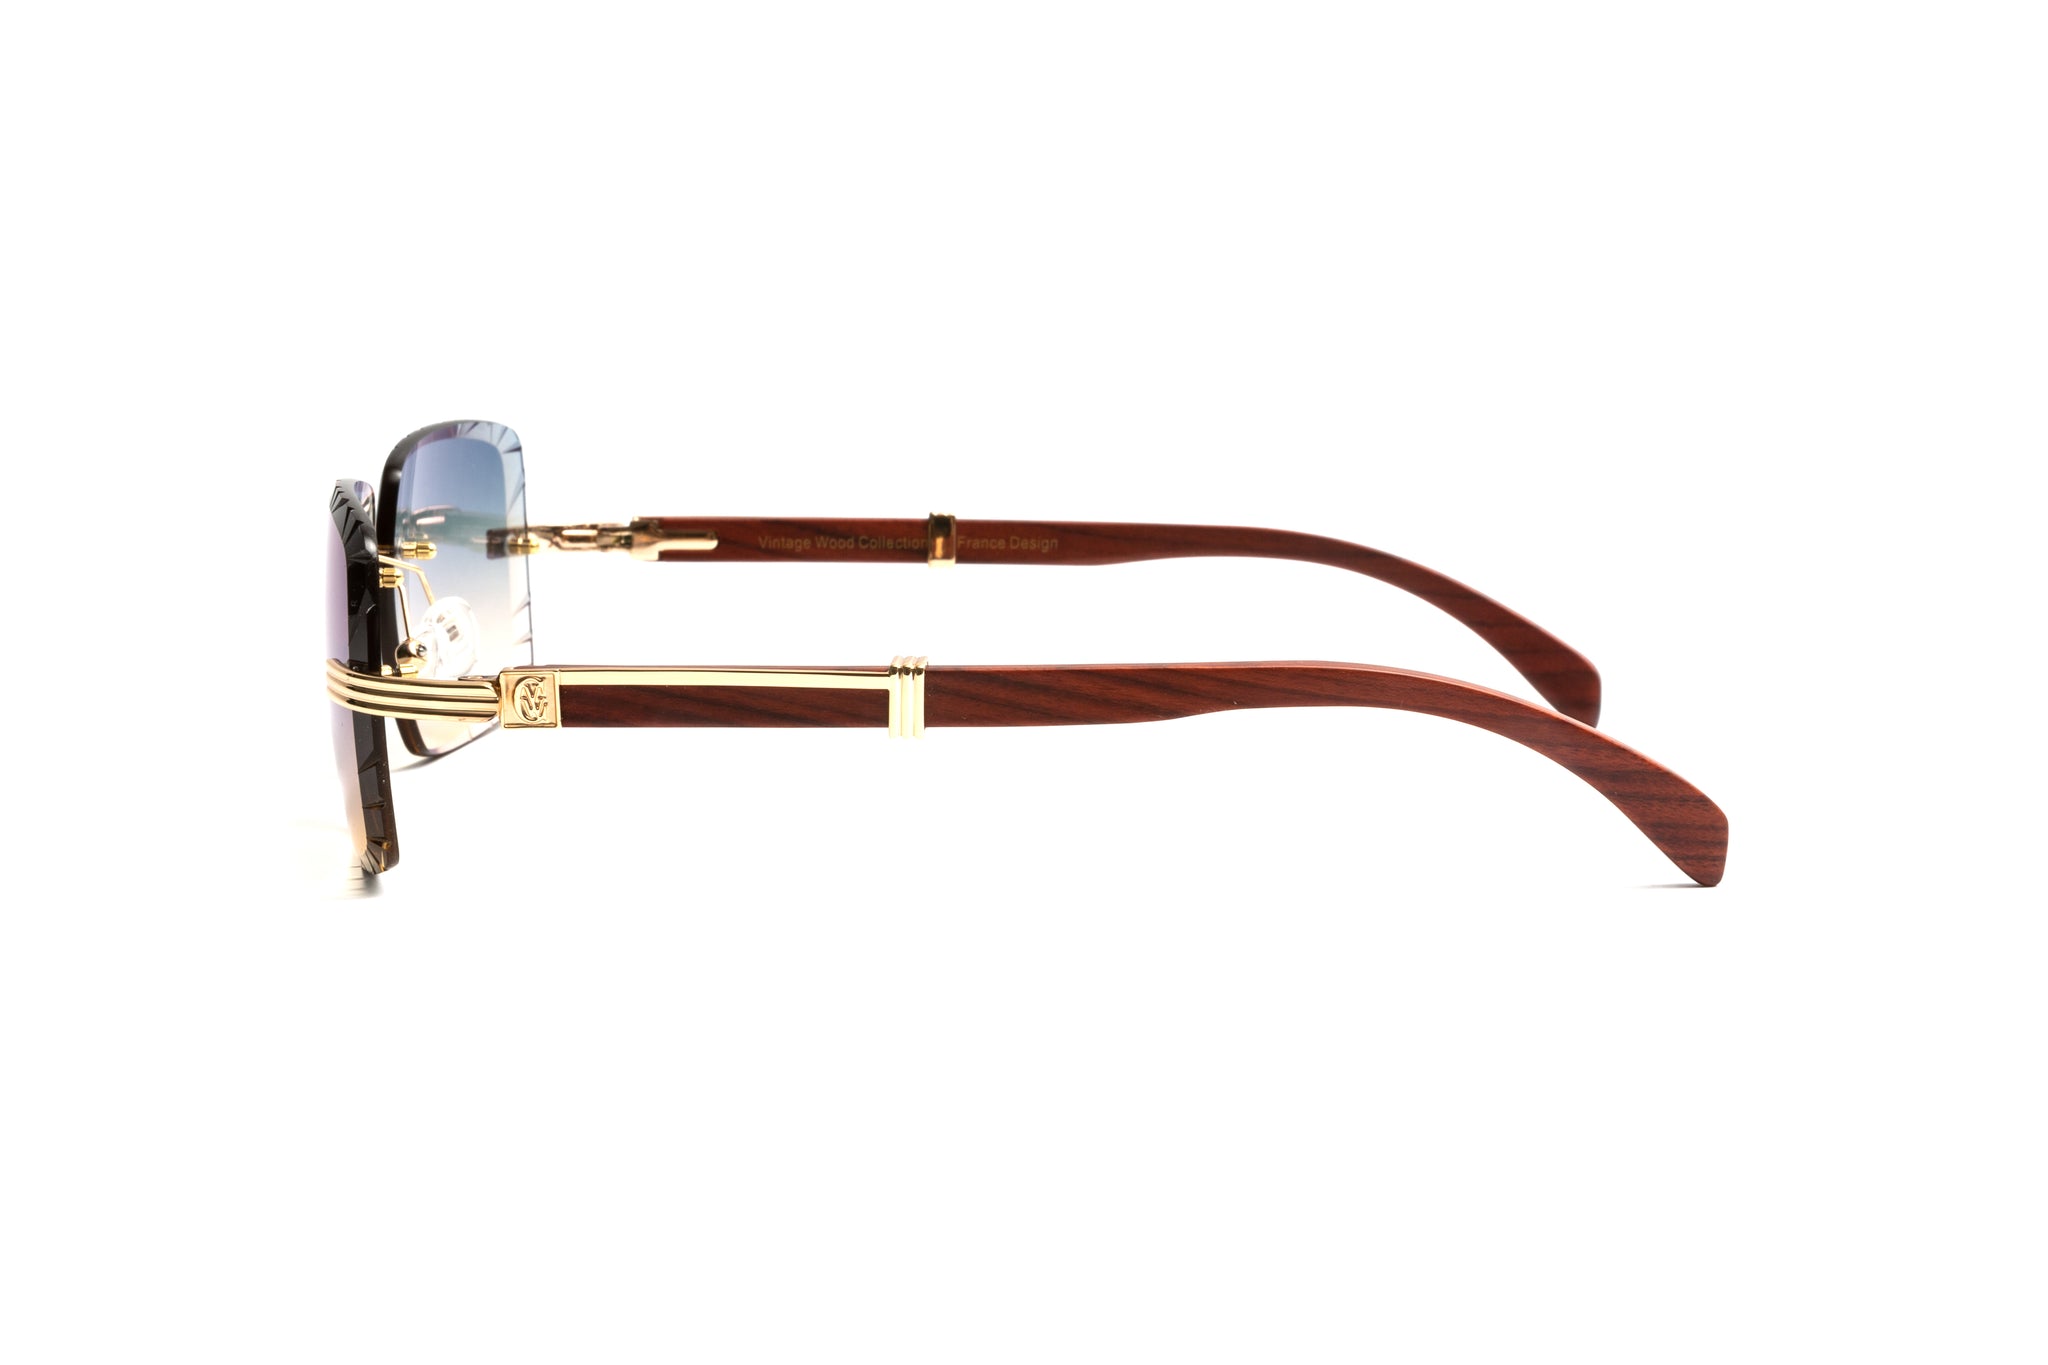 Premiere de Cartier style men's rimless sunglasses with brown cherry wood temples and 18kt plated gold with square diamond cut double gradient grey and yellow lenses by Vintage Wood Collection